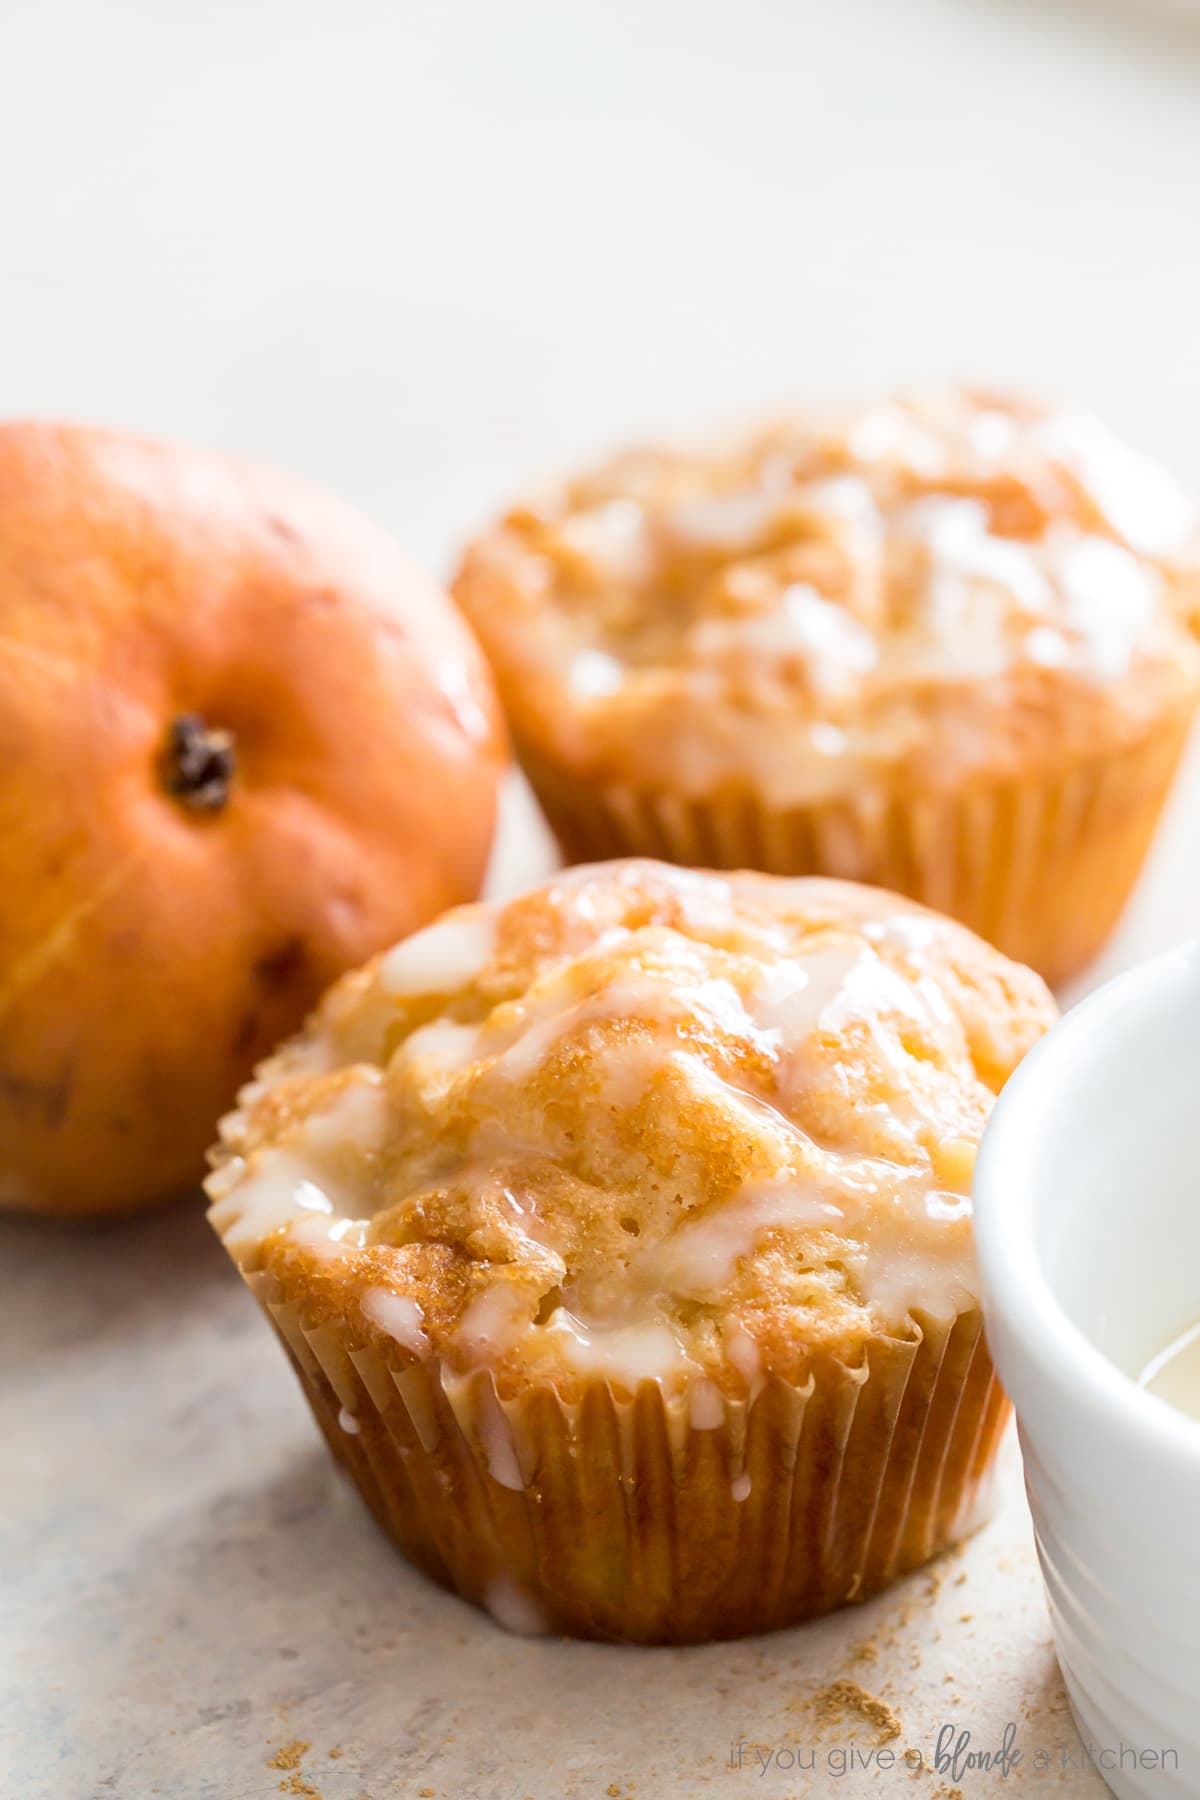 Two ginger pear muffins with glaze next to brown pear.